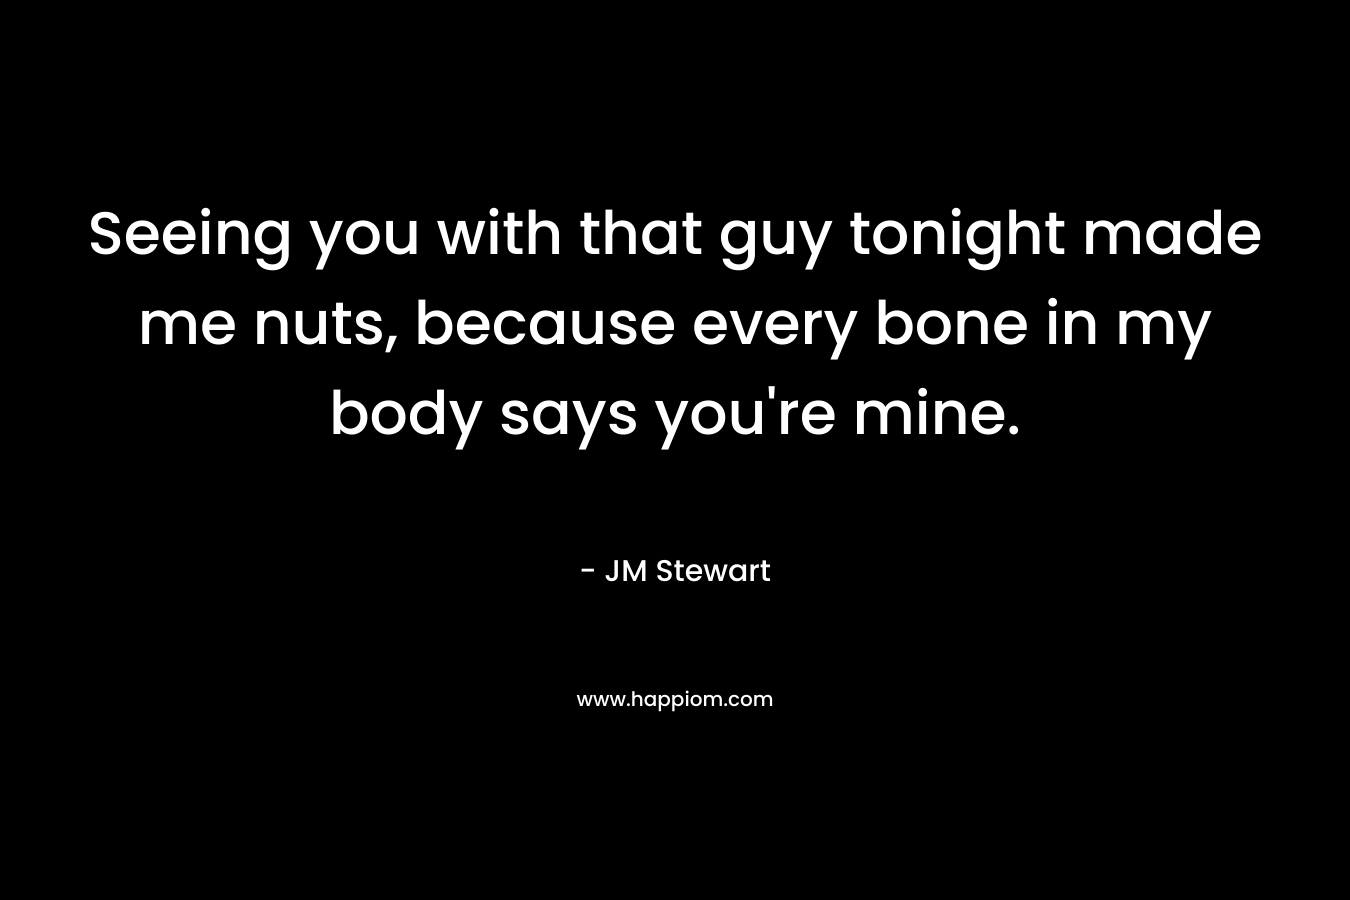 Seeing you with that guy tonight made me nuts, because every bone in my body says you're mine.